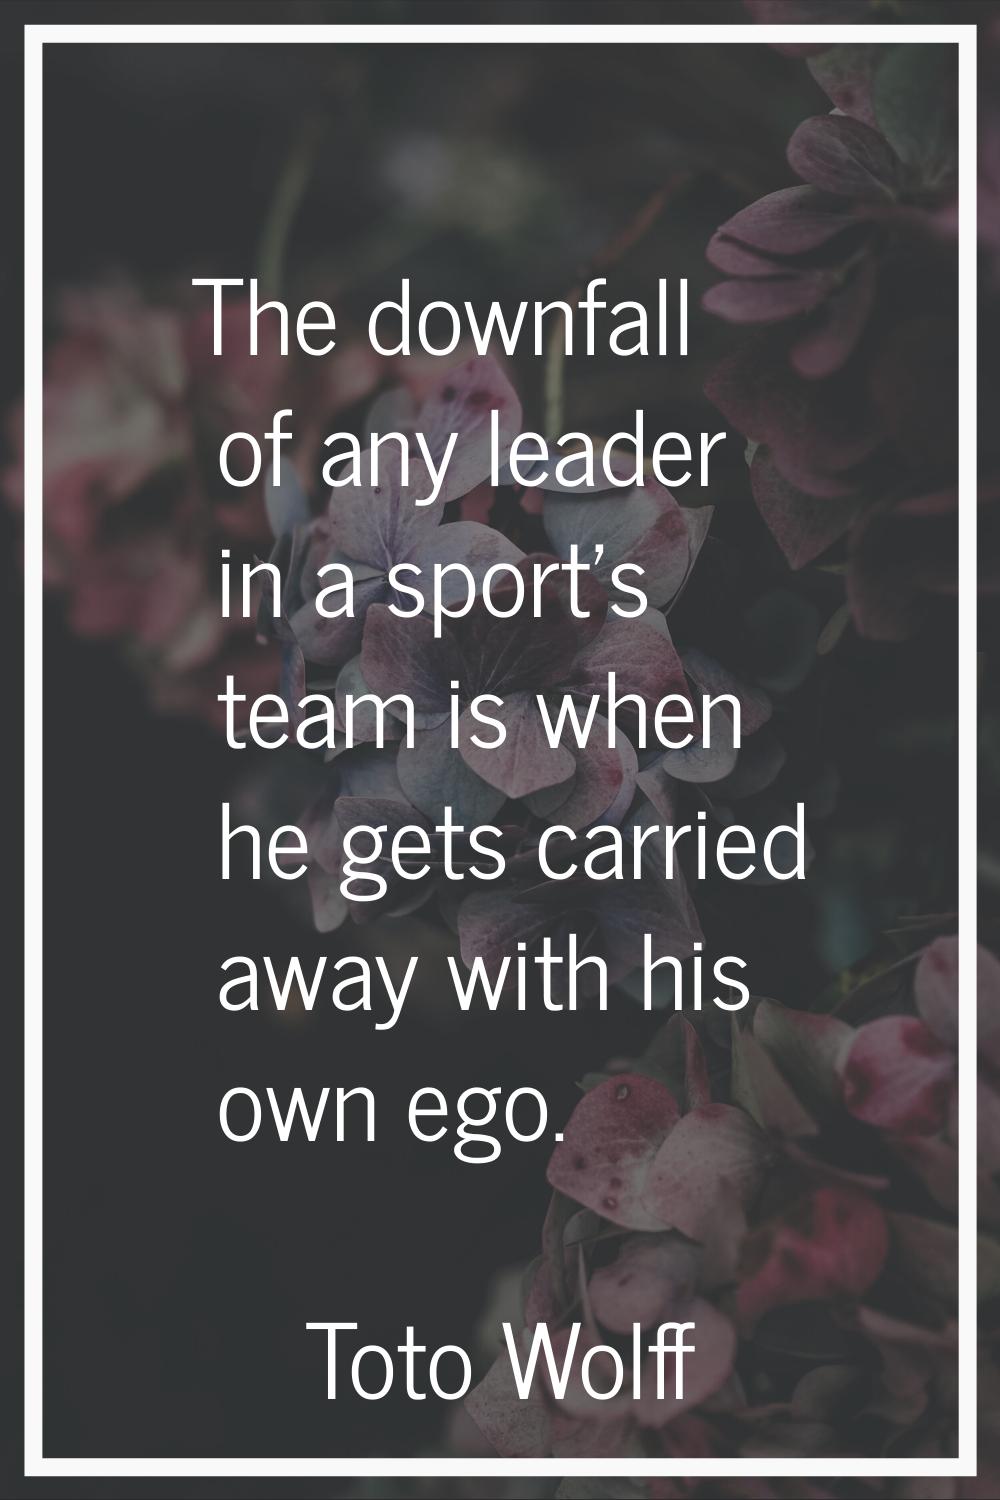 The downfall of any leader in a sport's team is when he gets carried away with his own ego.